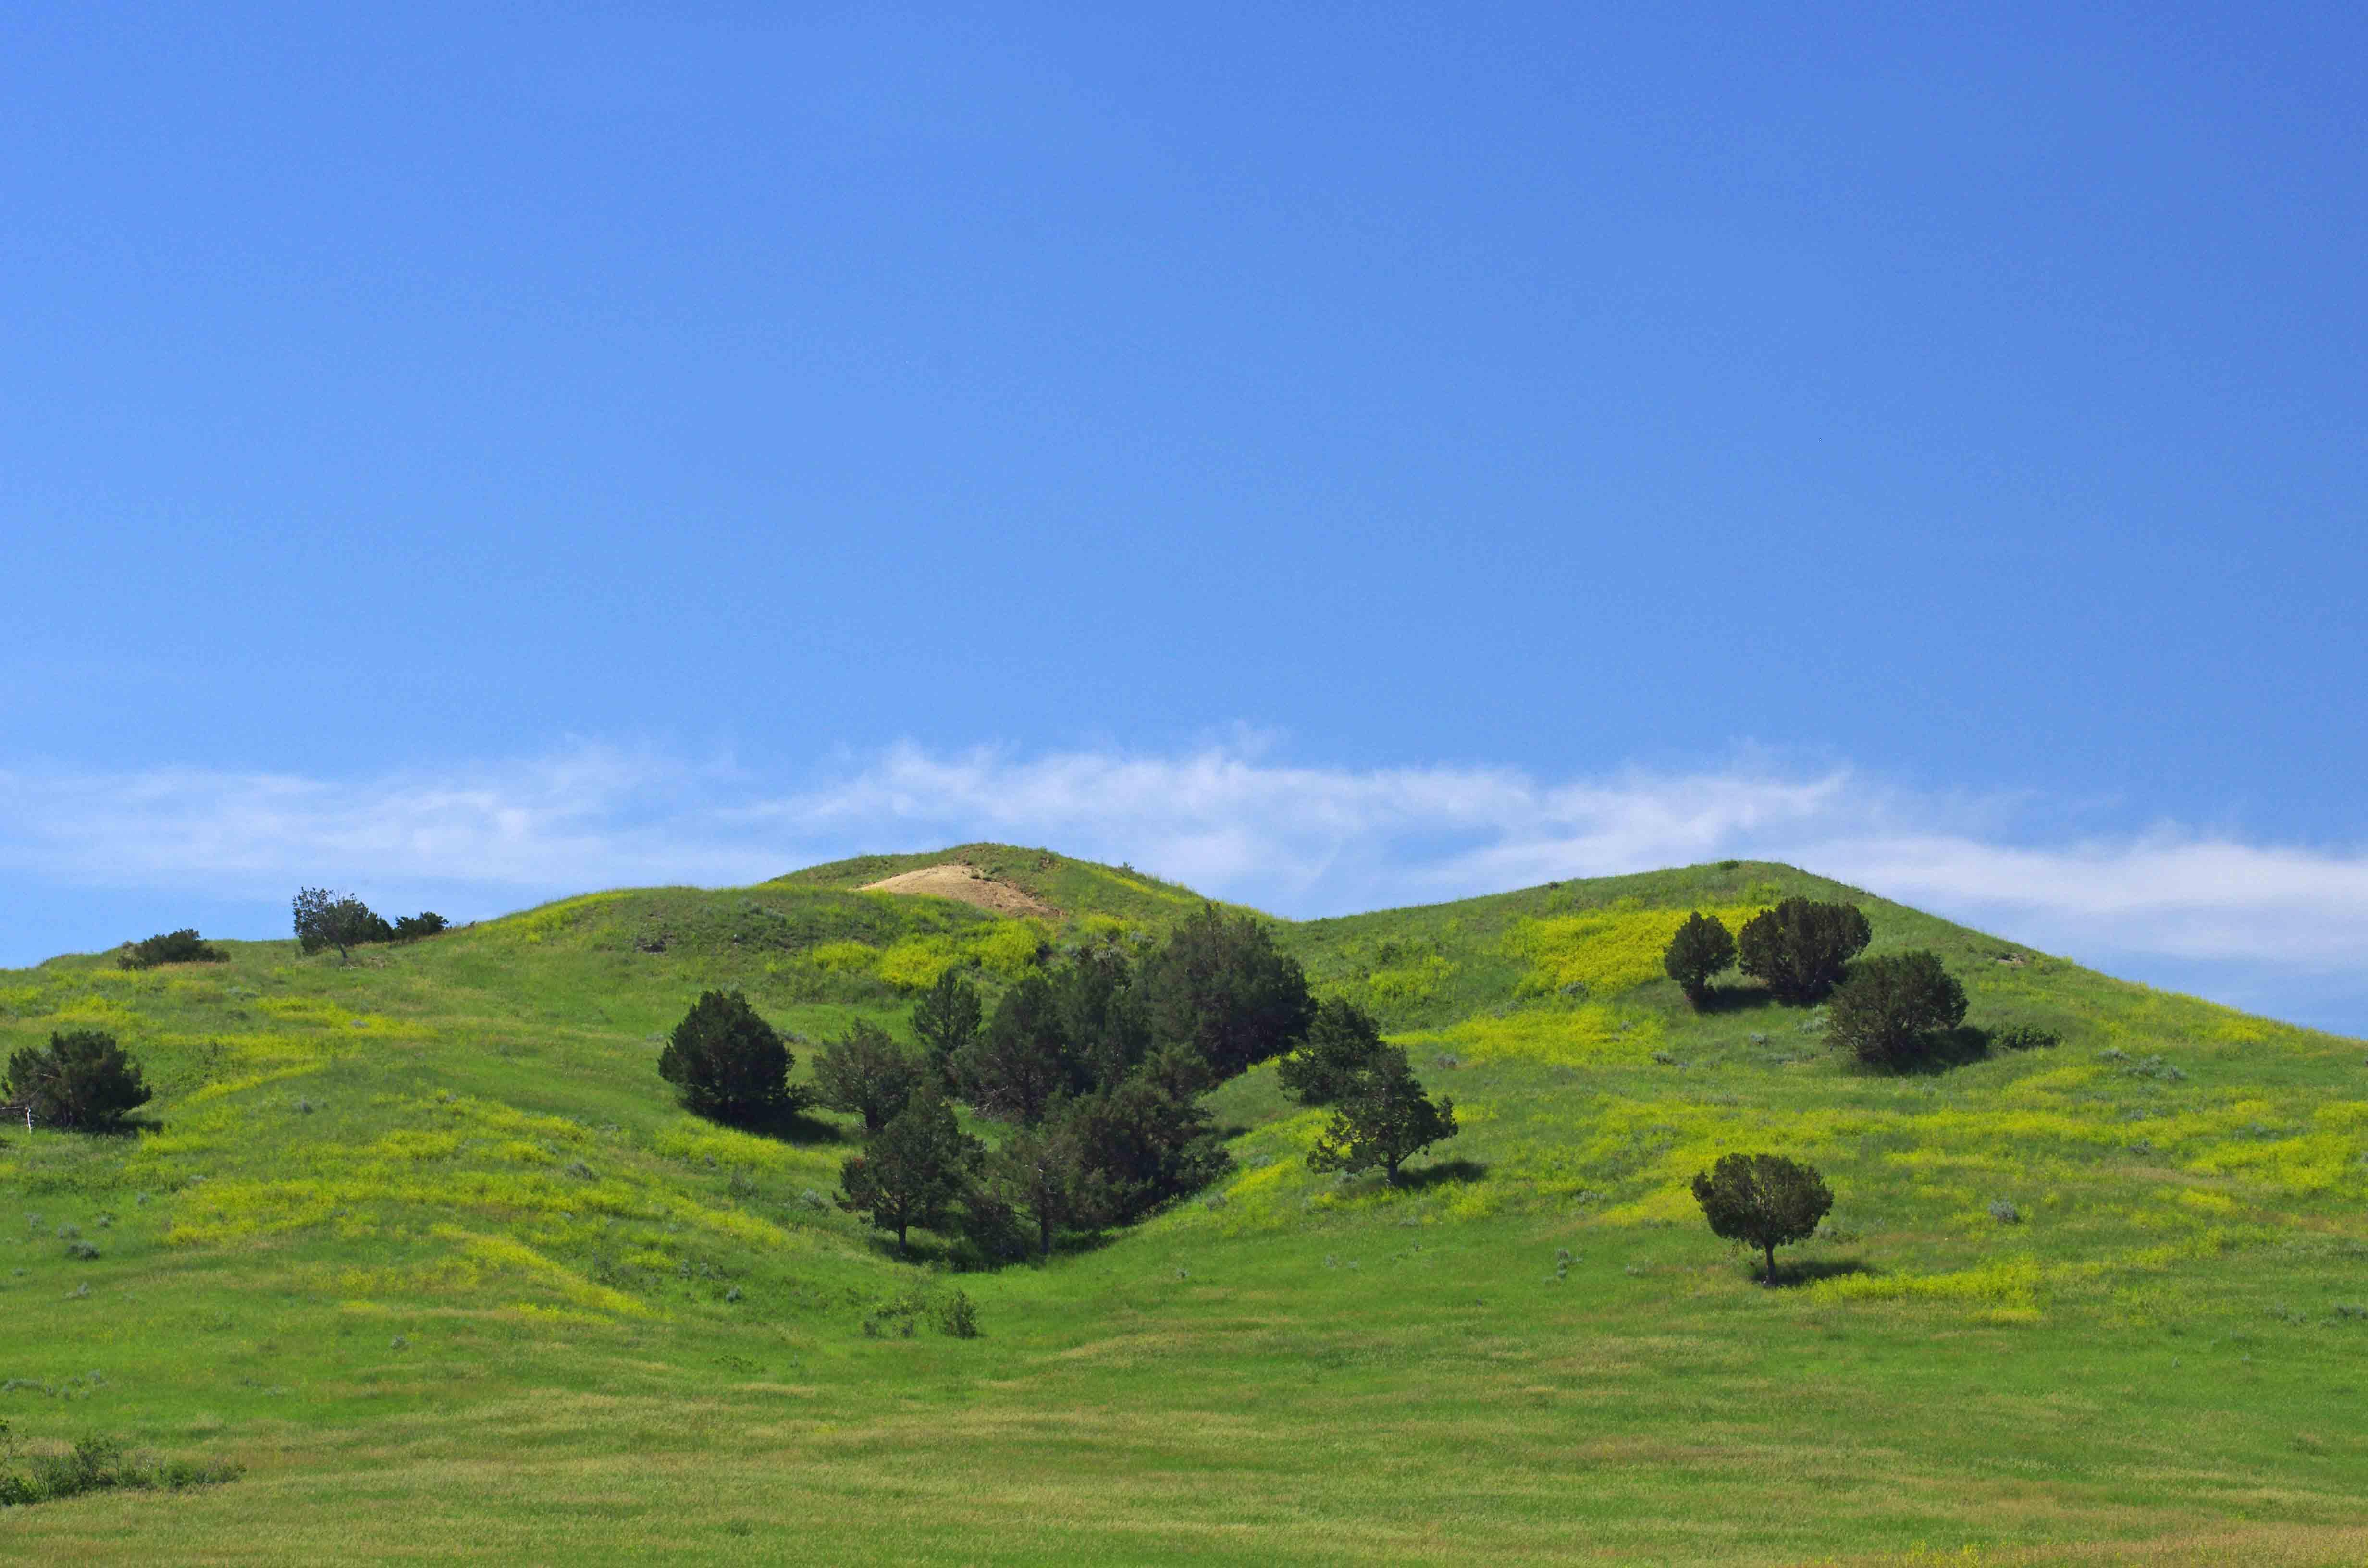 Rolling green hills of grass with juniper trees under blue sky.